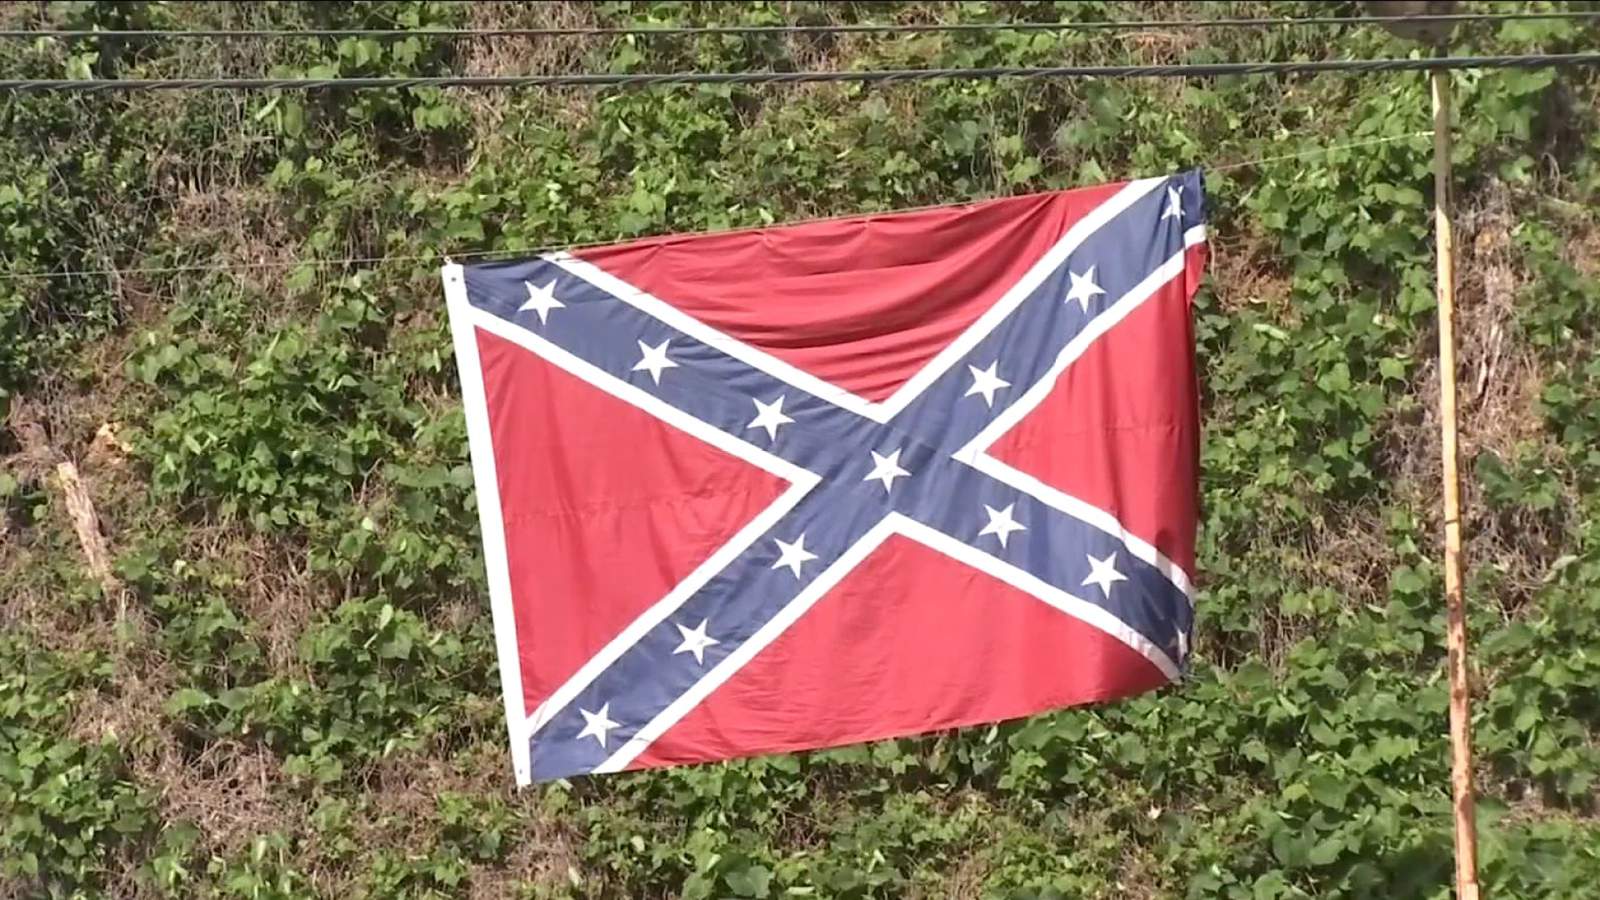 Signs of the South or symbols of oppression? Debate over Confederate flags, monuments intensifies